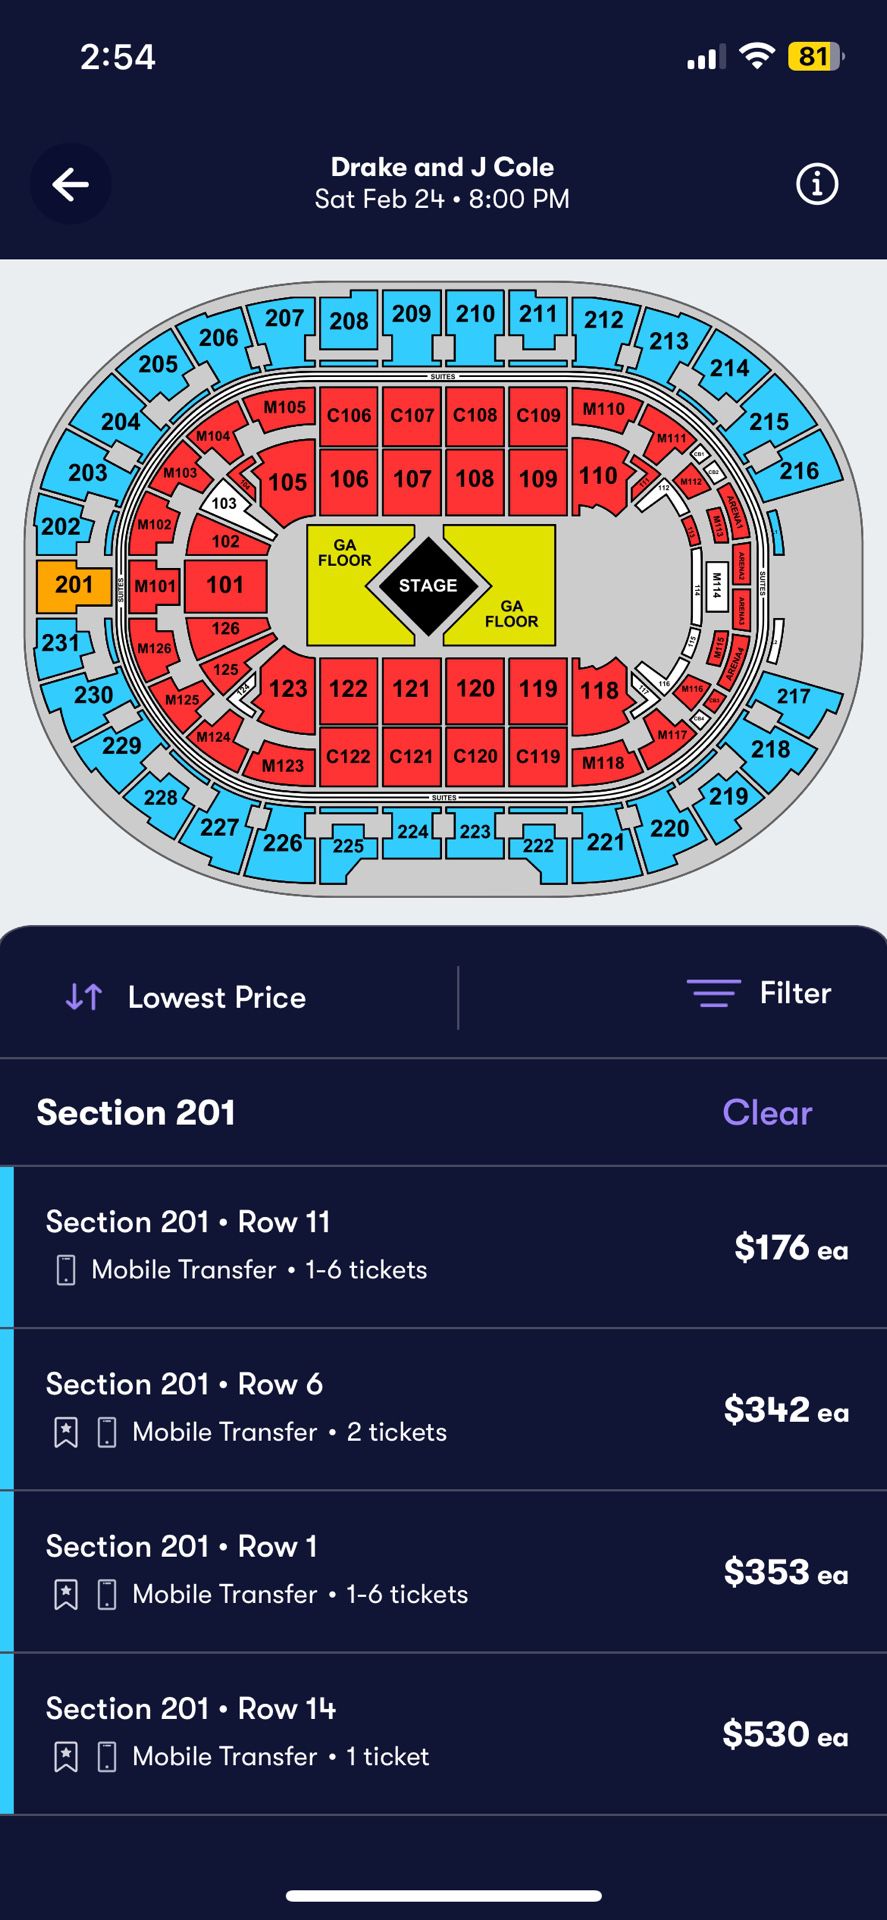 Drake And J.cole Tickets Feb 24